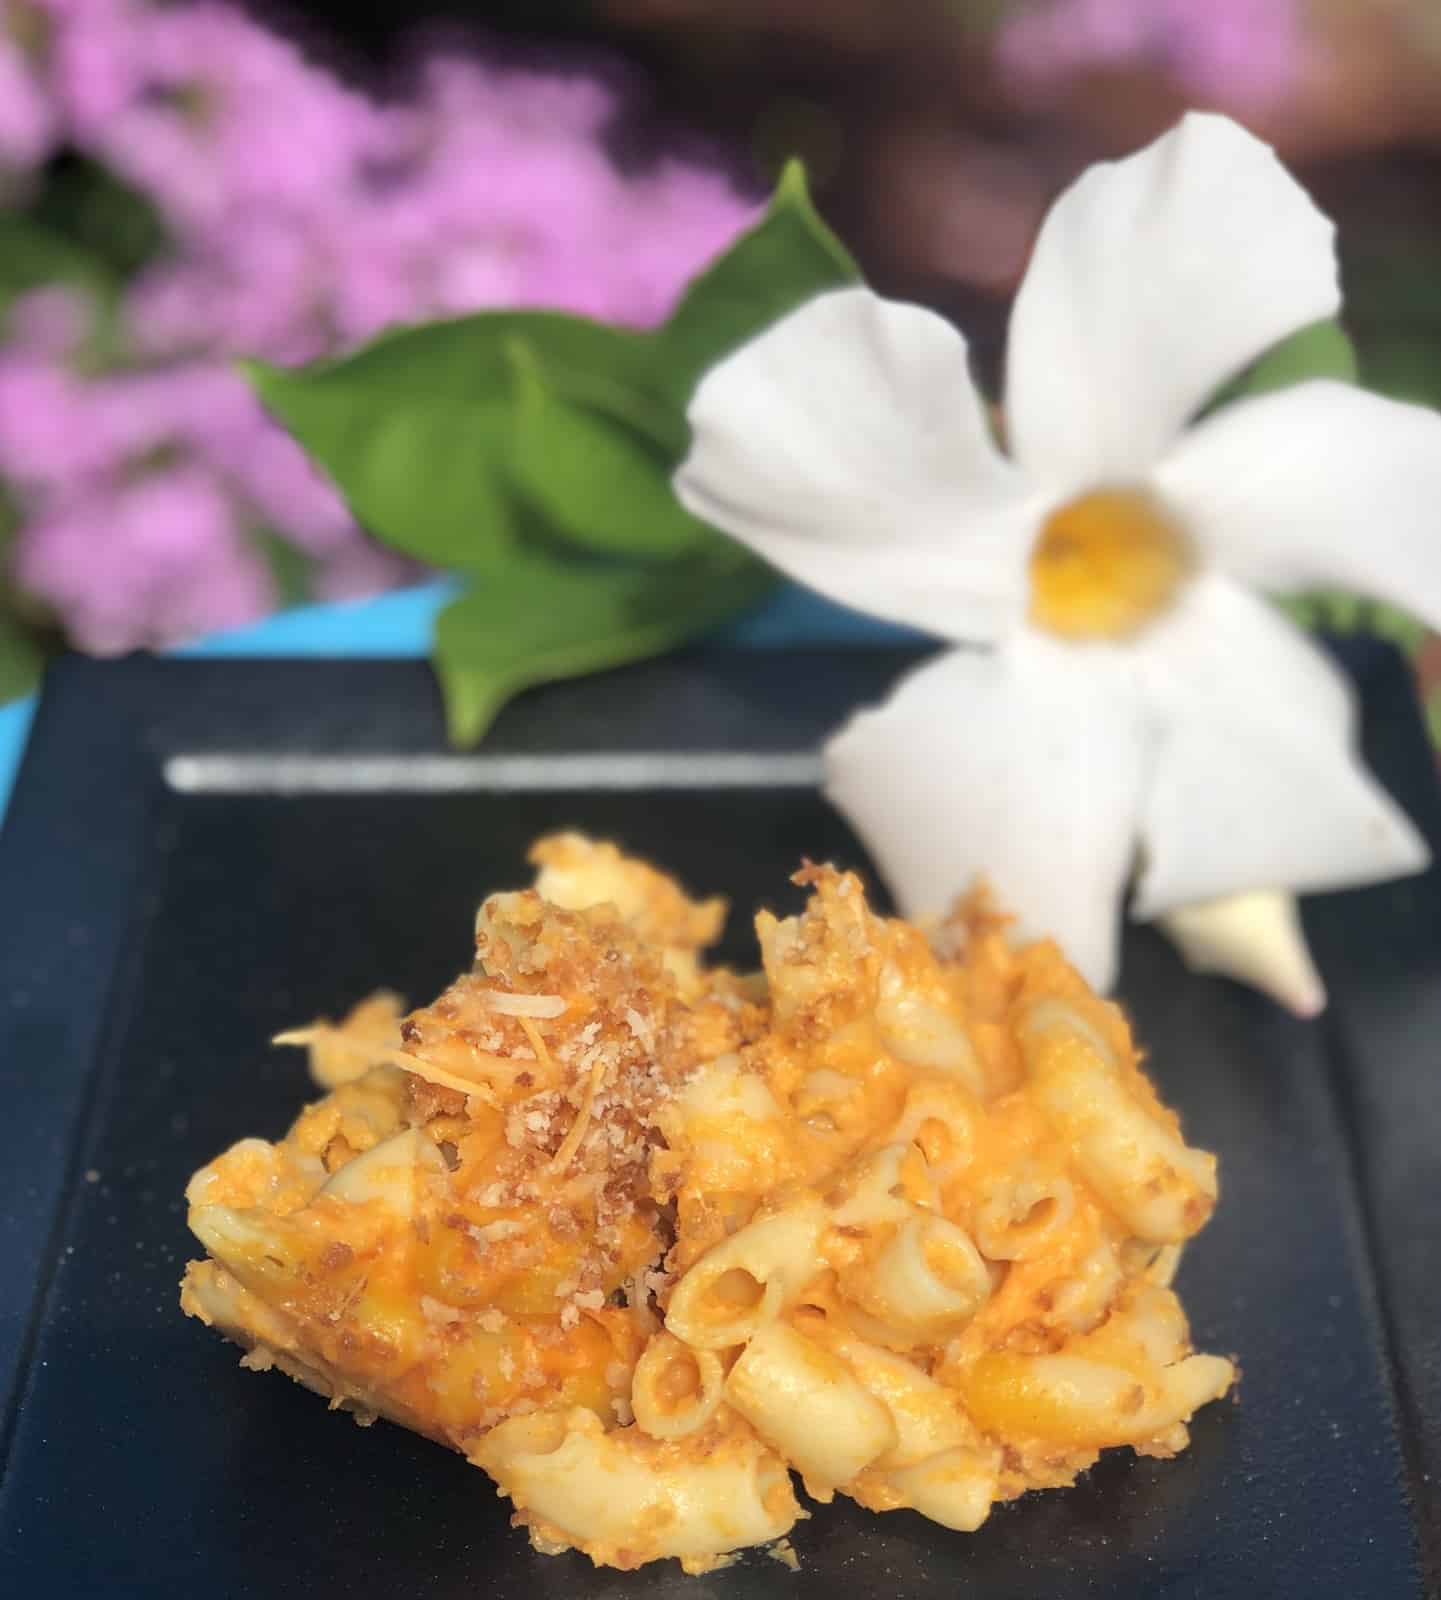 Macaroni and Cheese on a black plate  with a white flower